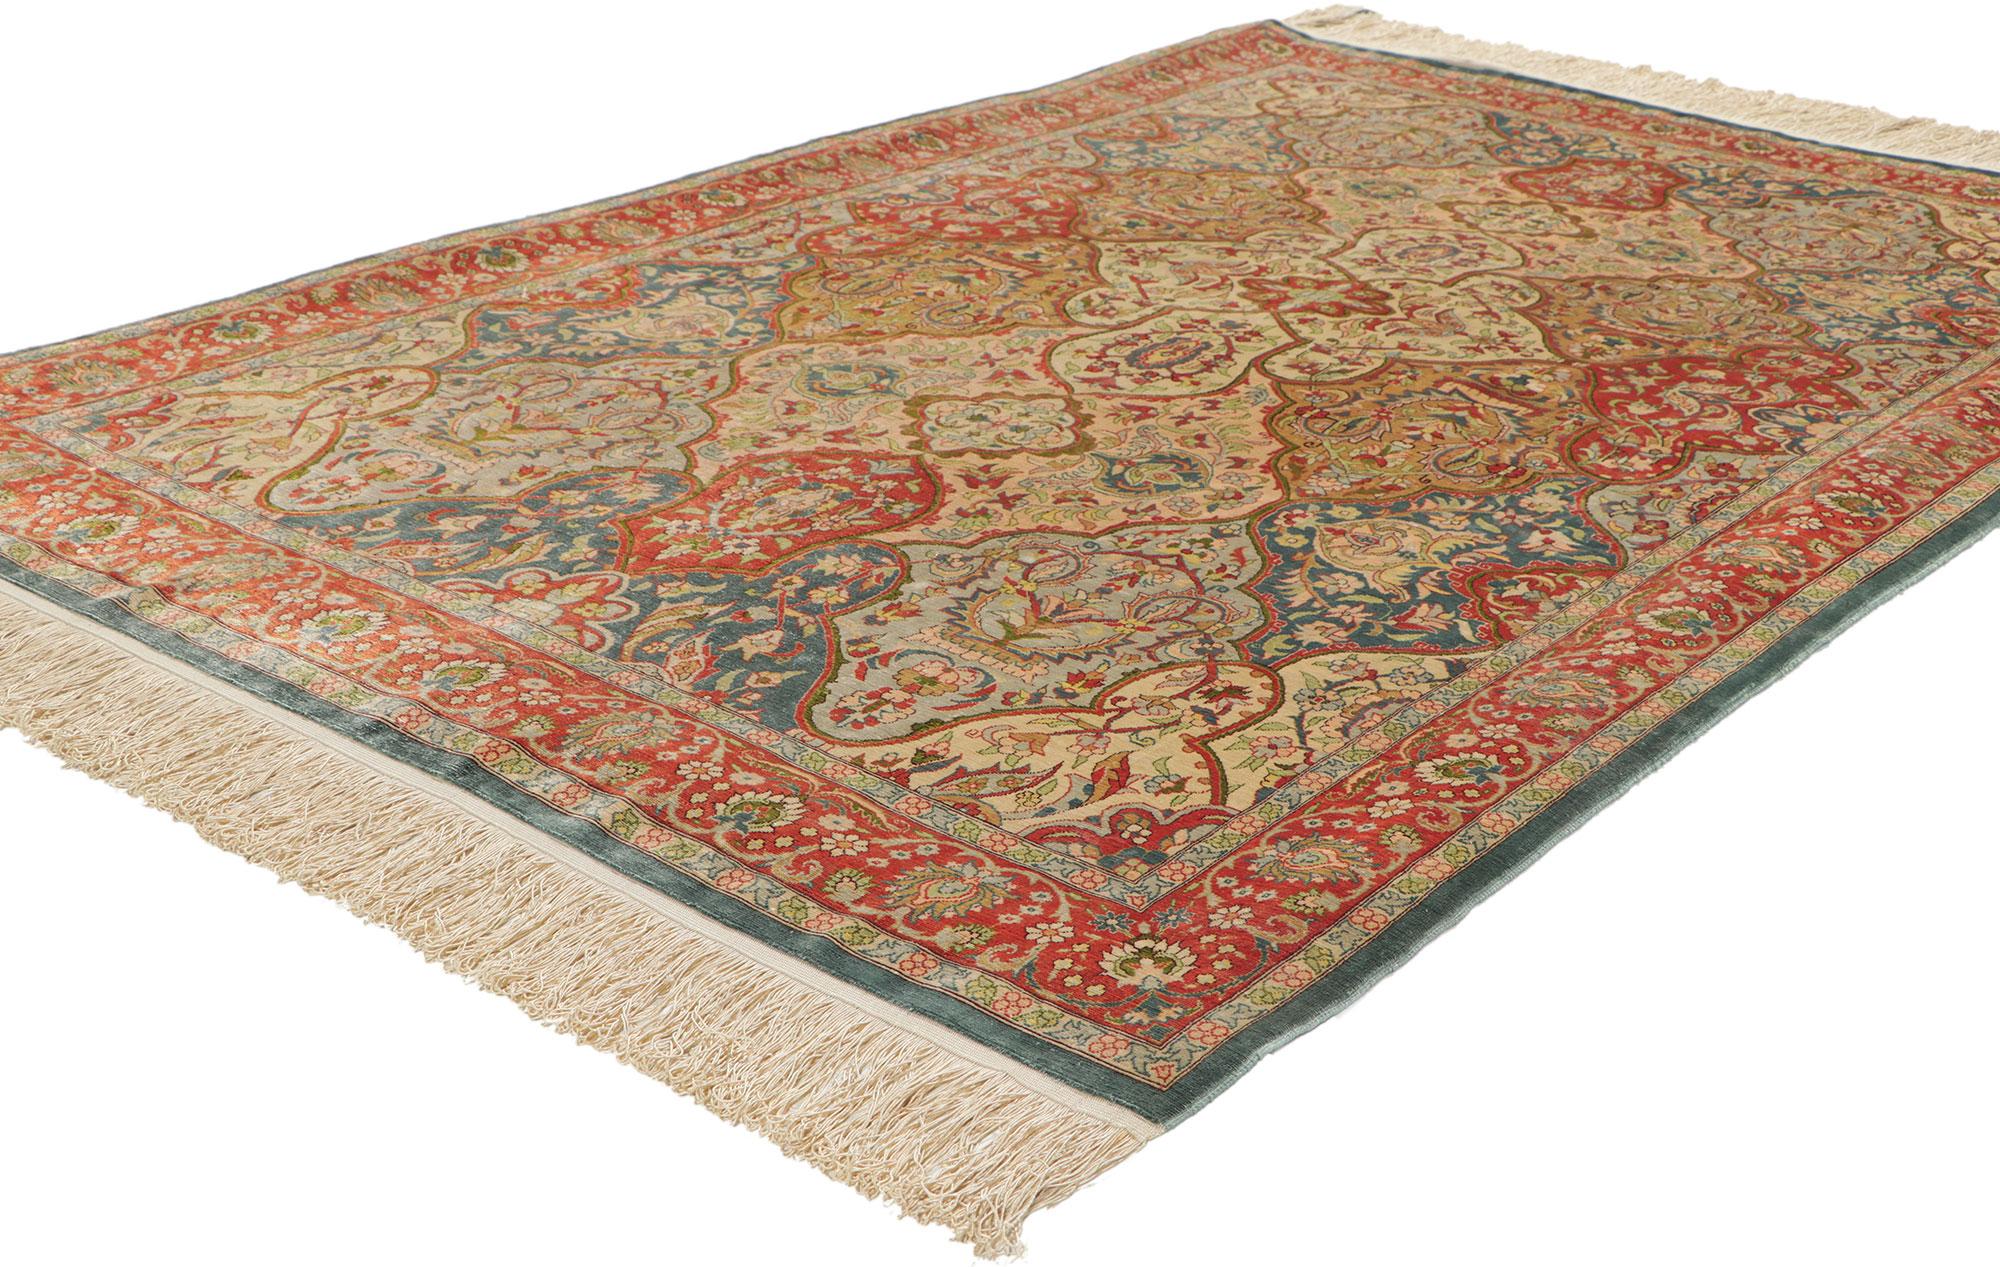 78514 Vintage Turkish Silk Hereke Rug, 03'06 x 05'05. Cleverly composed with incredible detail and texture, this hand knotted silk vintage Turkish Hereke rug is a captivating vision of woven beauty. The rare garden tile design and sophisticated